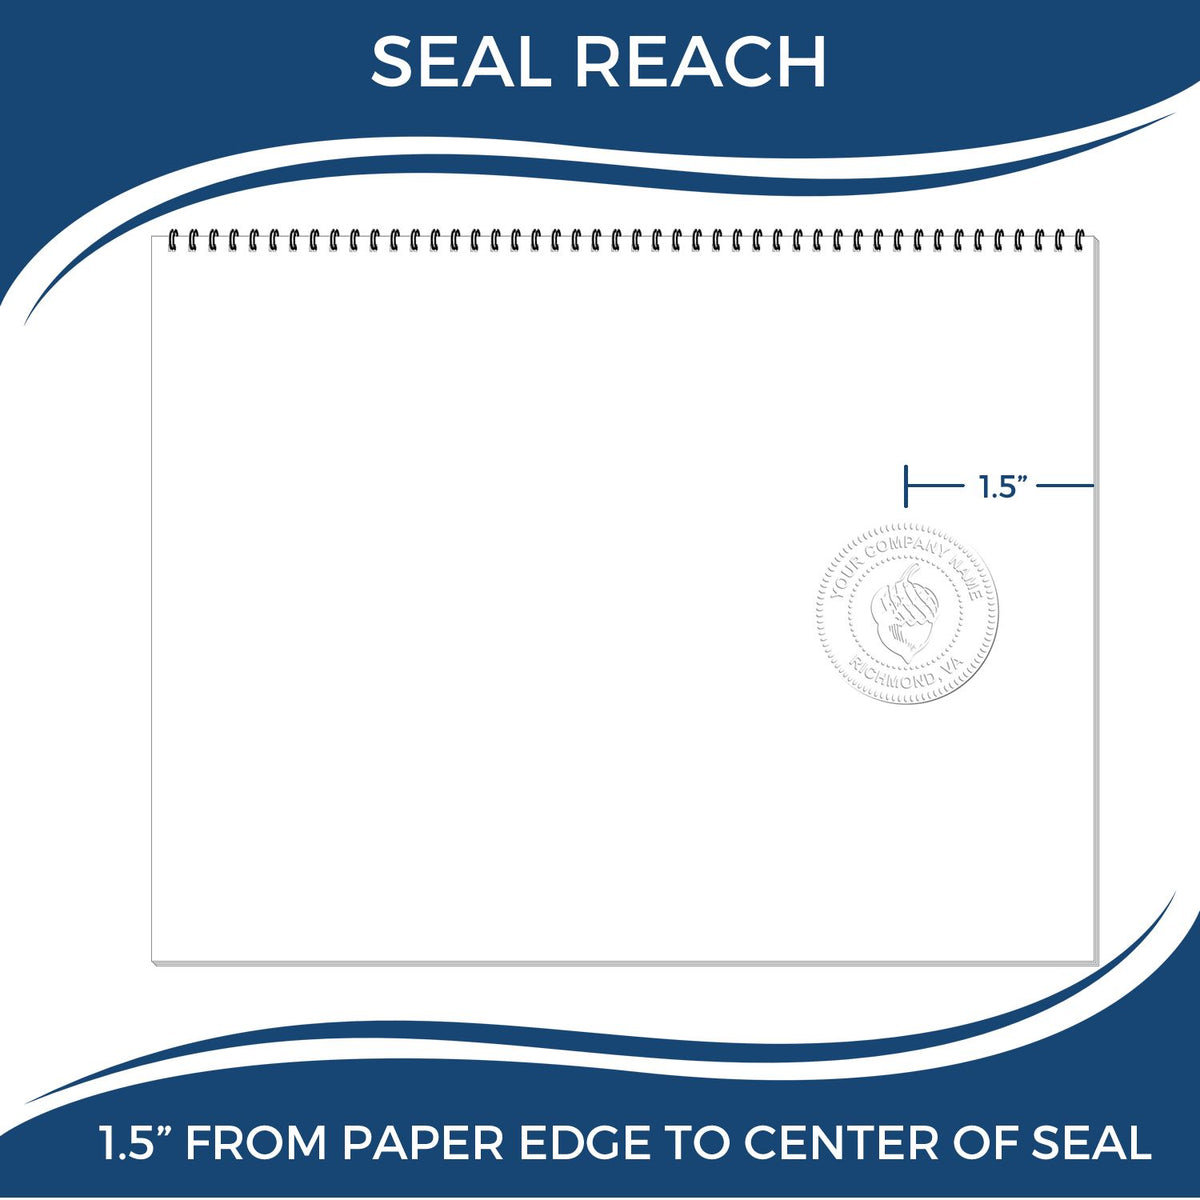 An infographic showing the seal reach which is represented by a ruler and a miniature seal image of the Gift Kentucky Land Surveyor Seal